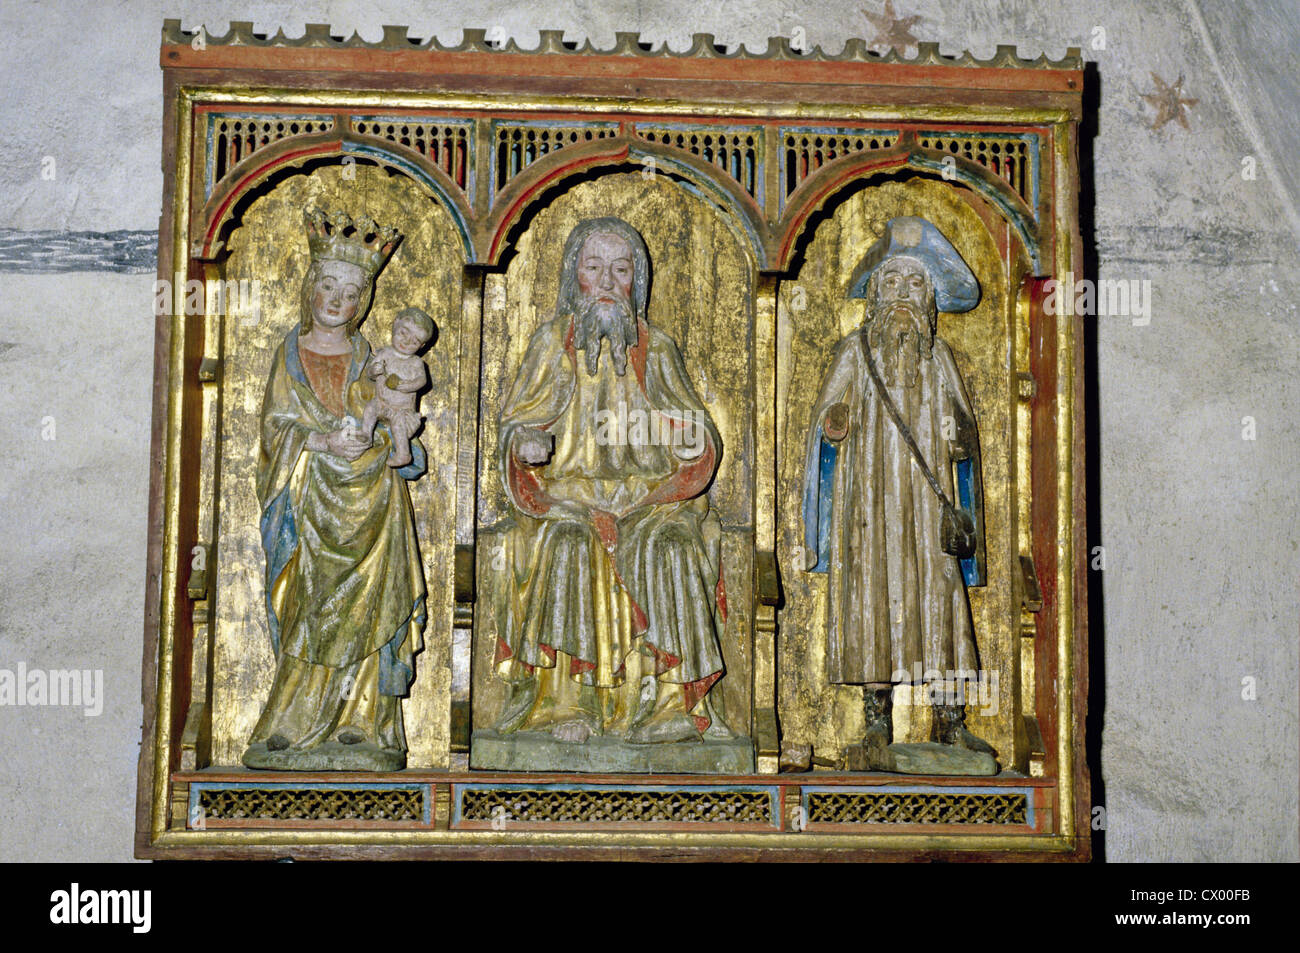 A triptych with three carved statues in the 15th century church at Rymattyla, Finland Stock Photo